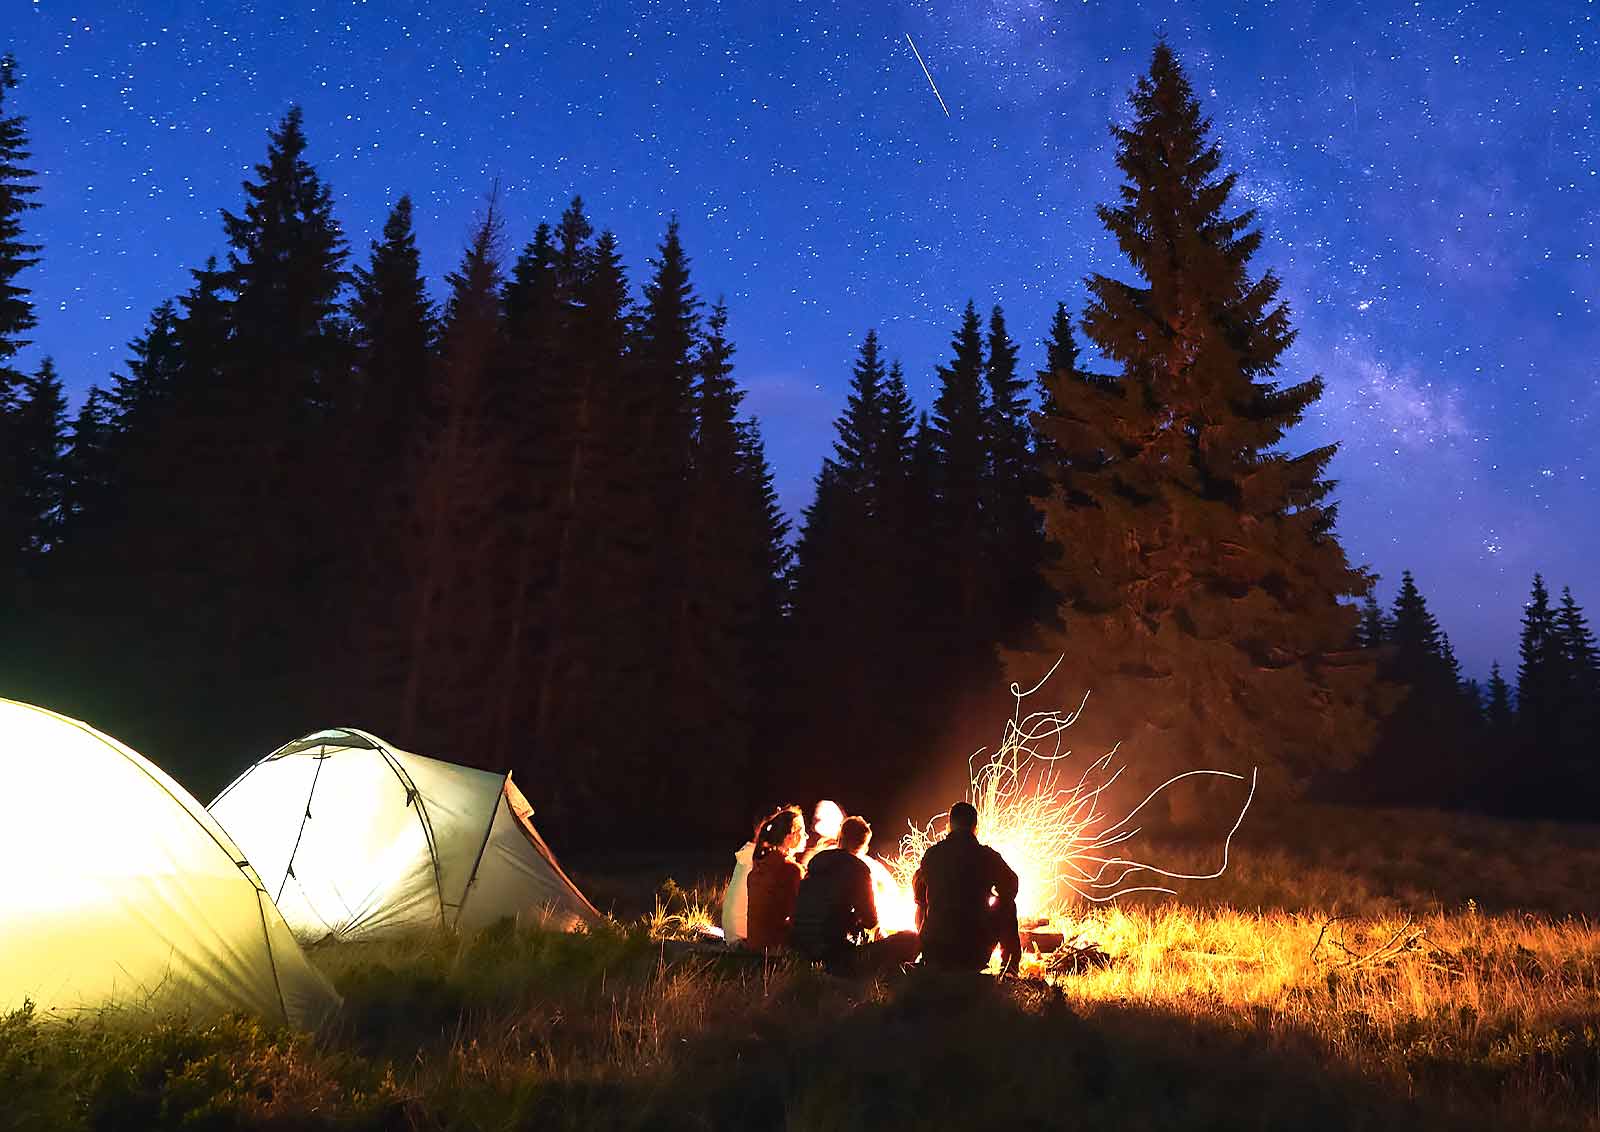 Campers enjoying a fire under the the star-filled nighttime sky.